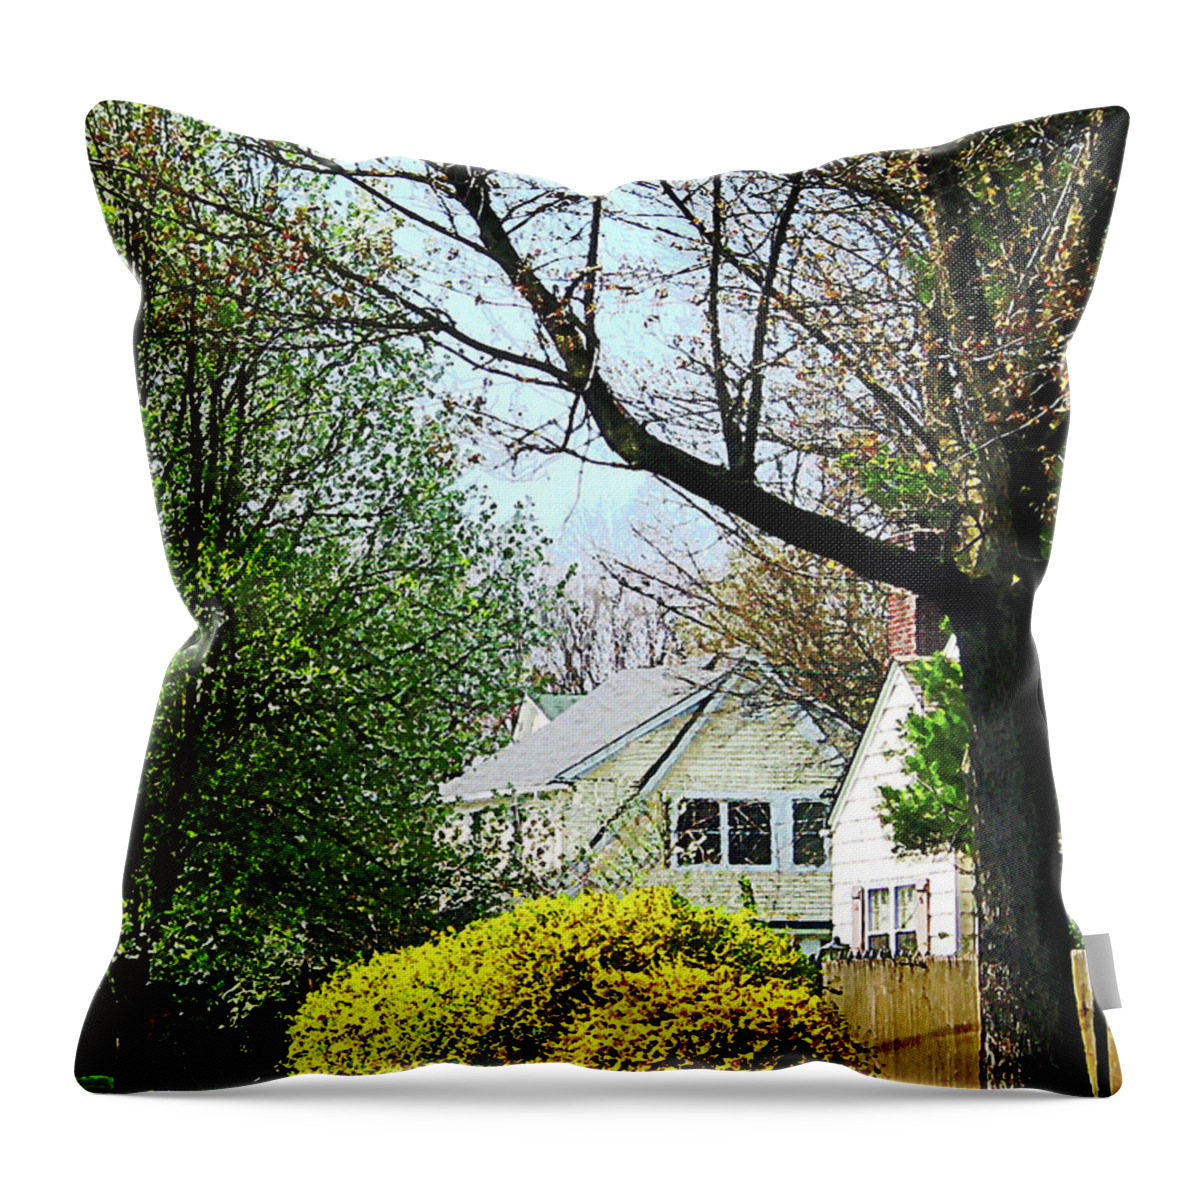 Spring Throw Pillow featuring the photograph Street With Forsythia by Susan Savad